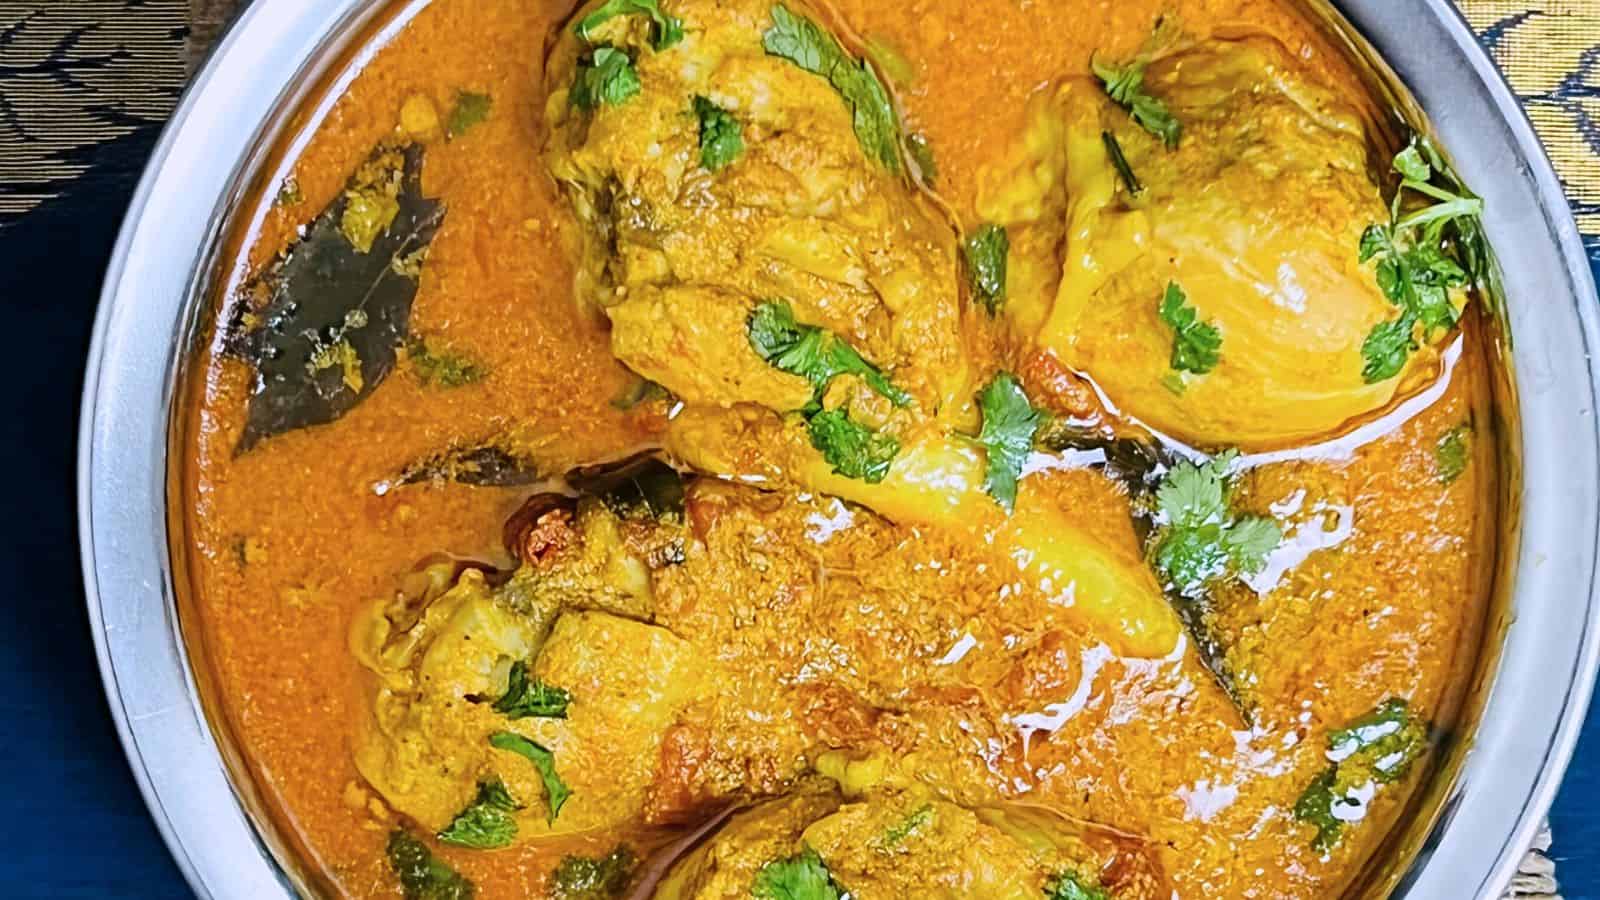 <p>Straight from the south of India, this dish offers a fiery spice that entices the brave. It's a testament to regional cuisine that stands out with bold flavors. For heat lovers, it's a must-try lure that doesn't disappoint.<br><strong>Get the Recipe: </strong><a href="https://easyindiancookbook.com/chettinad-chicken/?utm_source=msn&utm_medium=page&utm_campaign=msn">Chettinad Chicken</a></p>